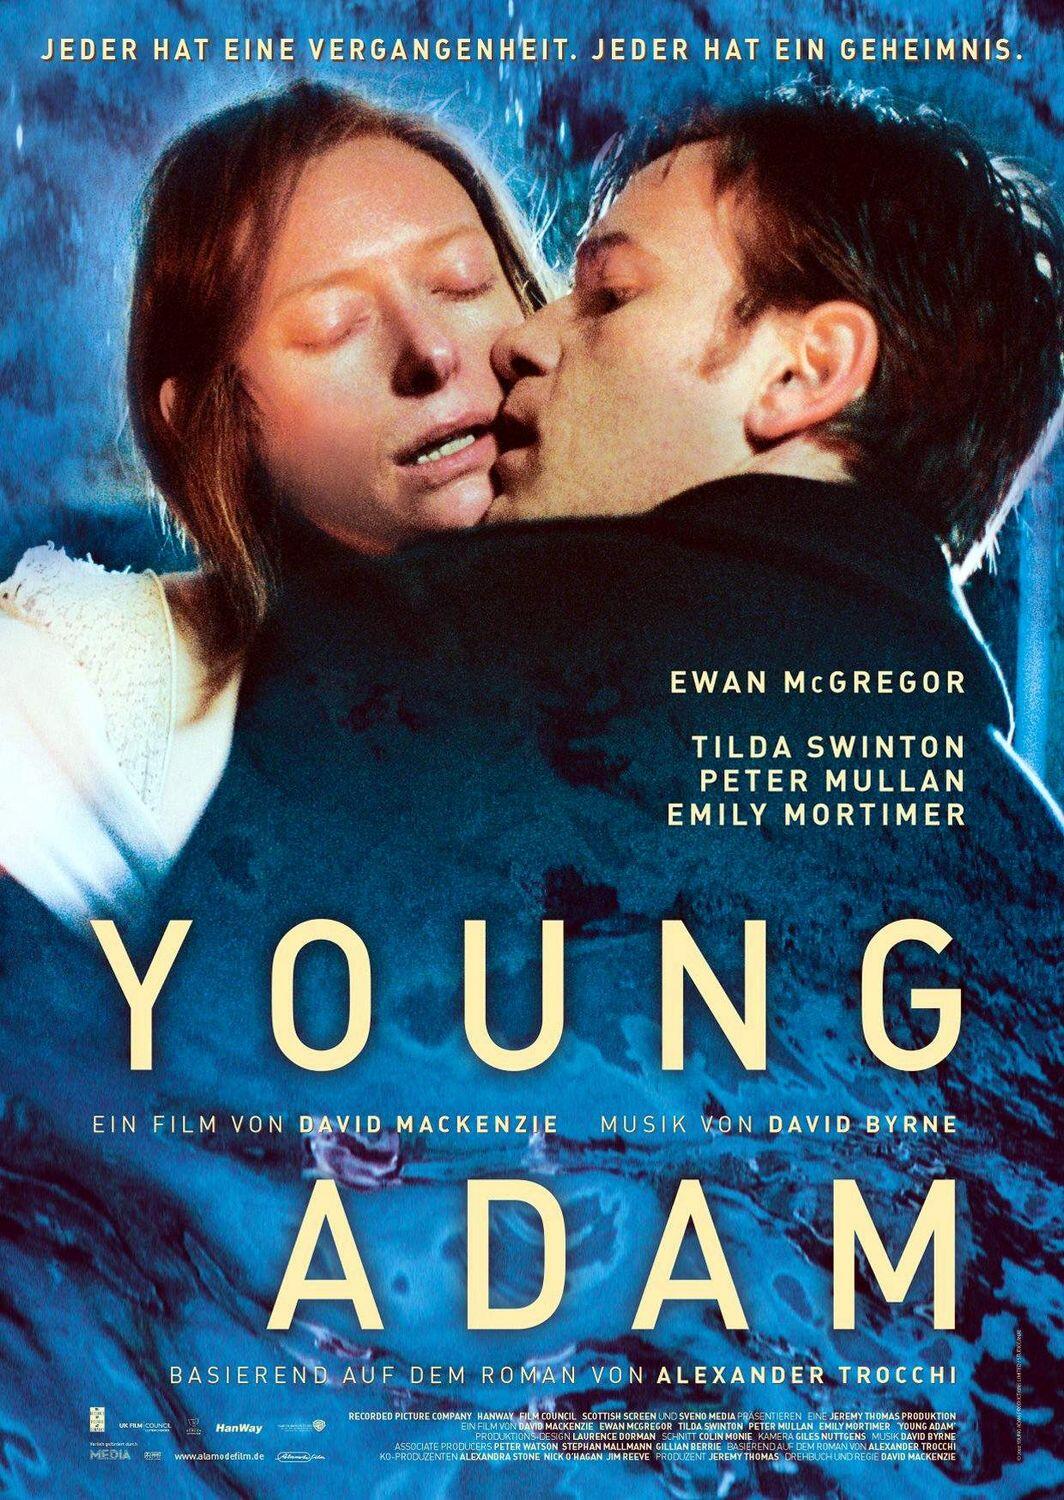 chan violet recommends young adams full movie pic